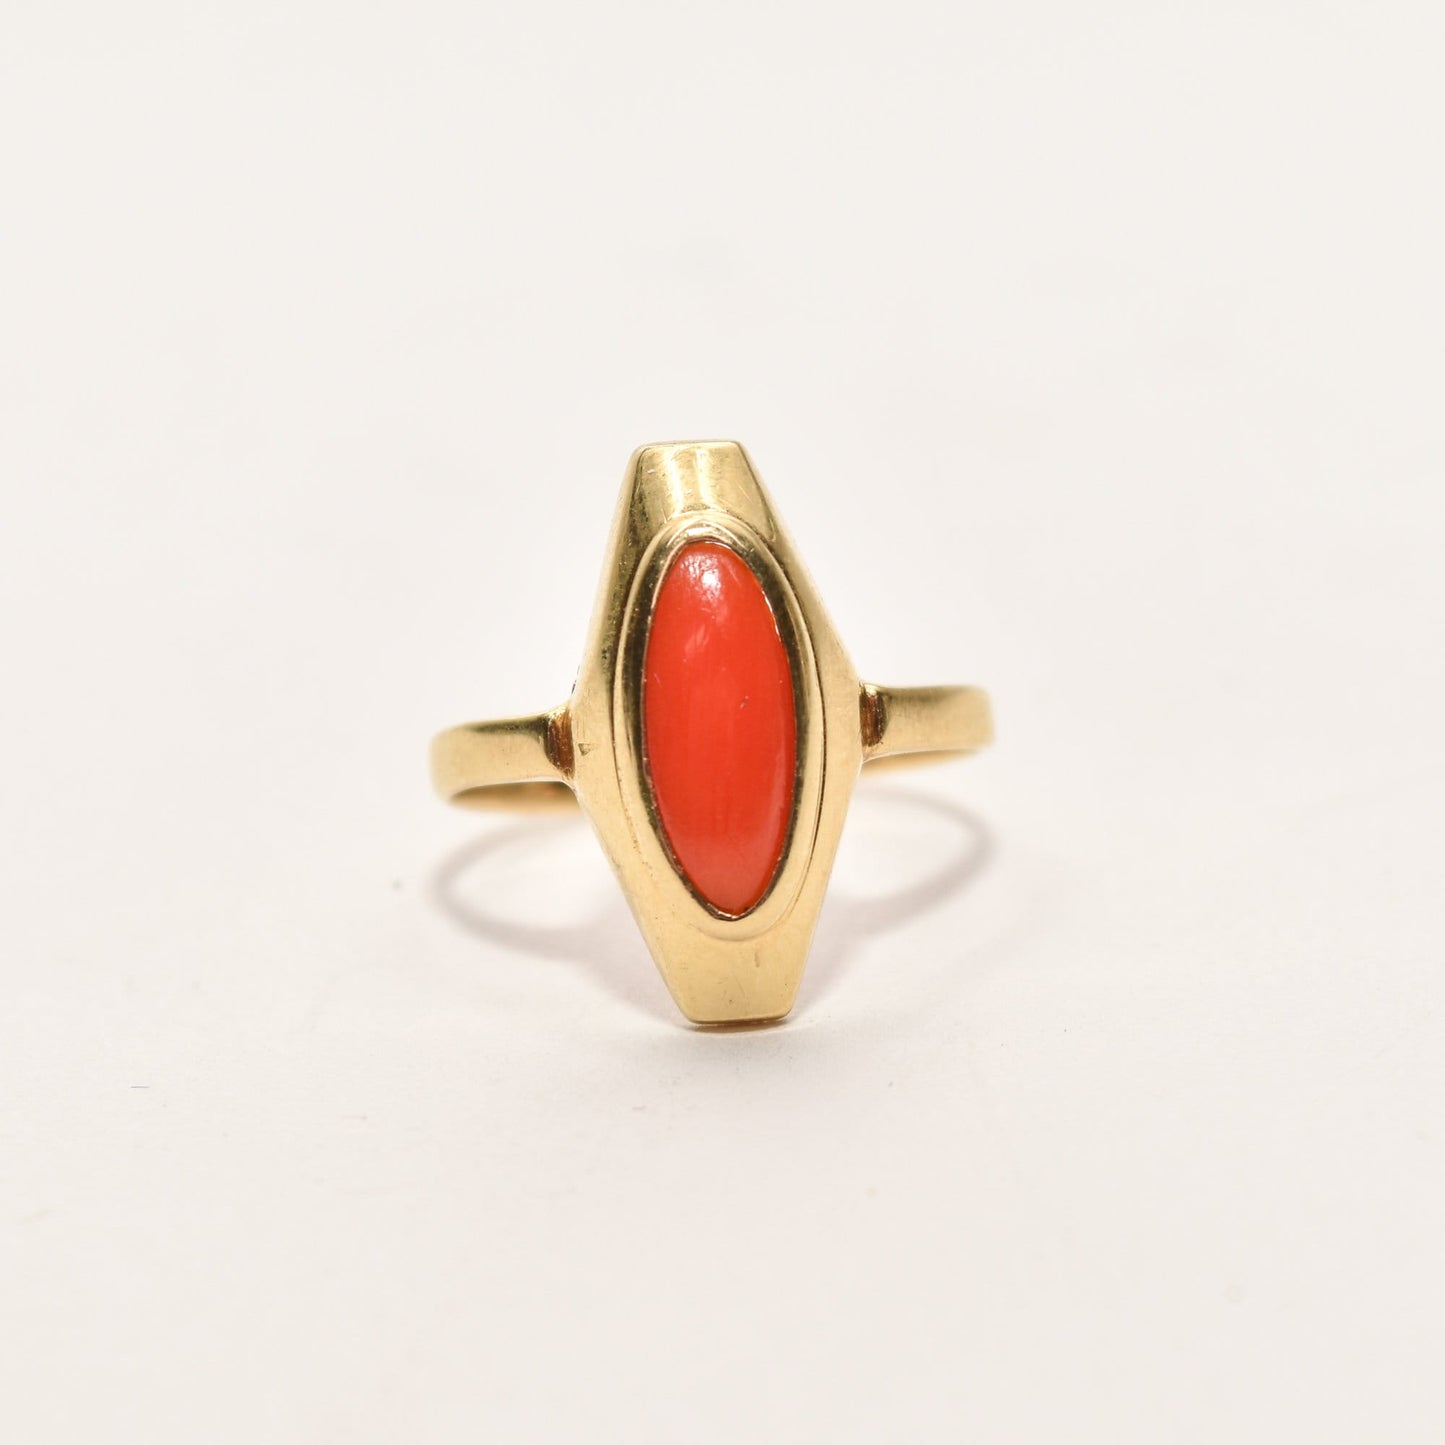 Estate 18K yellow gold ring featuring marquise-cut red coral, size 5.25 US, displayed on a white background.